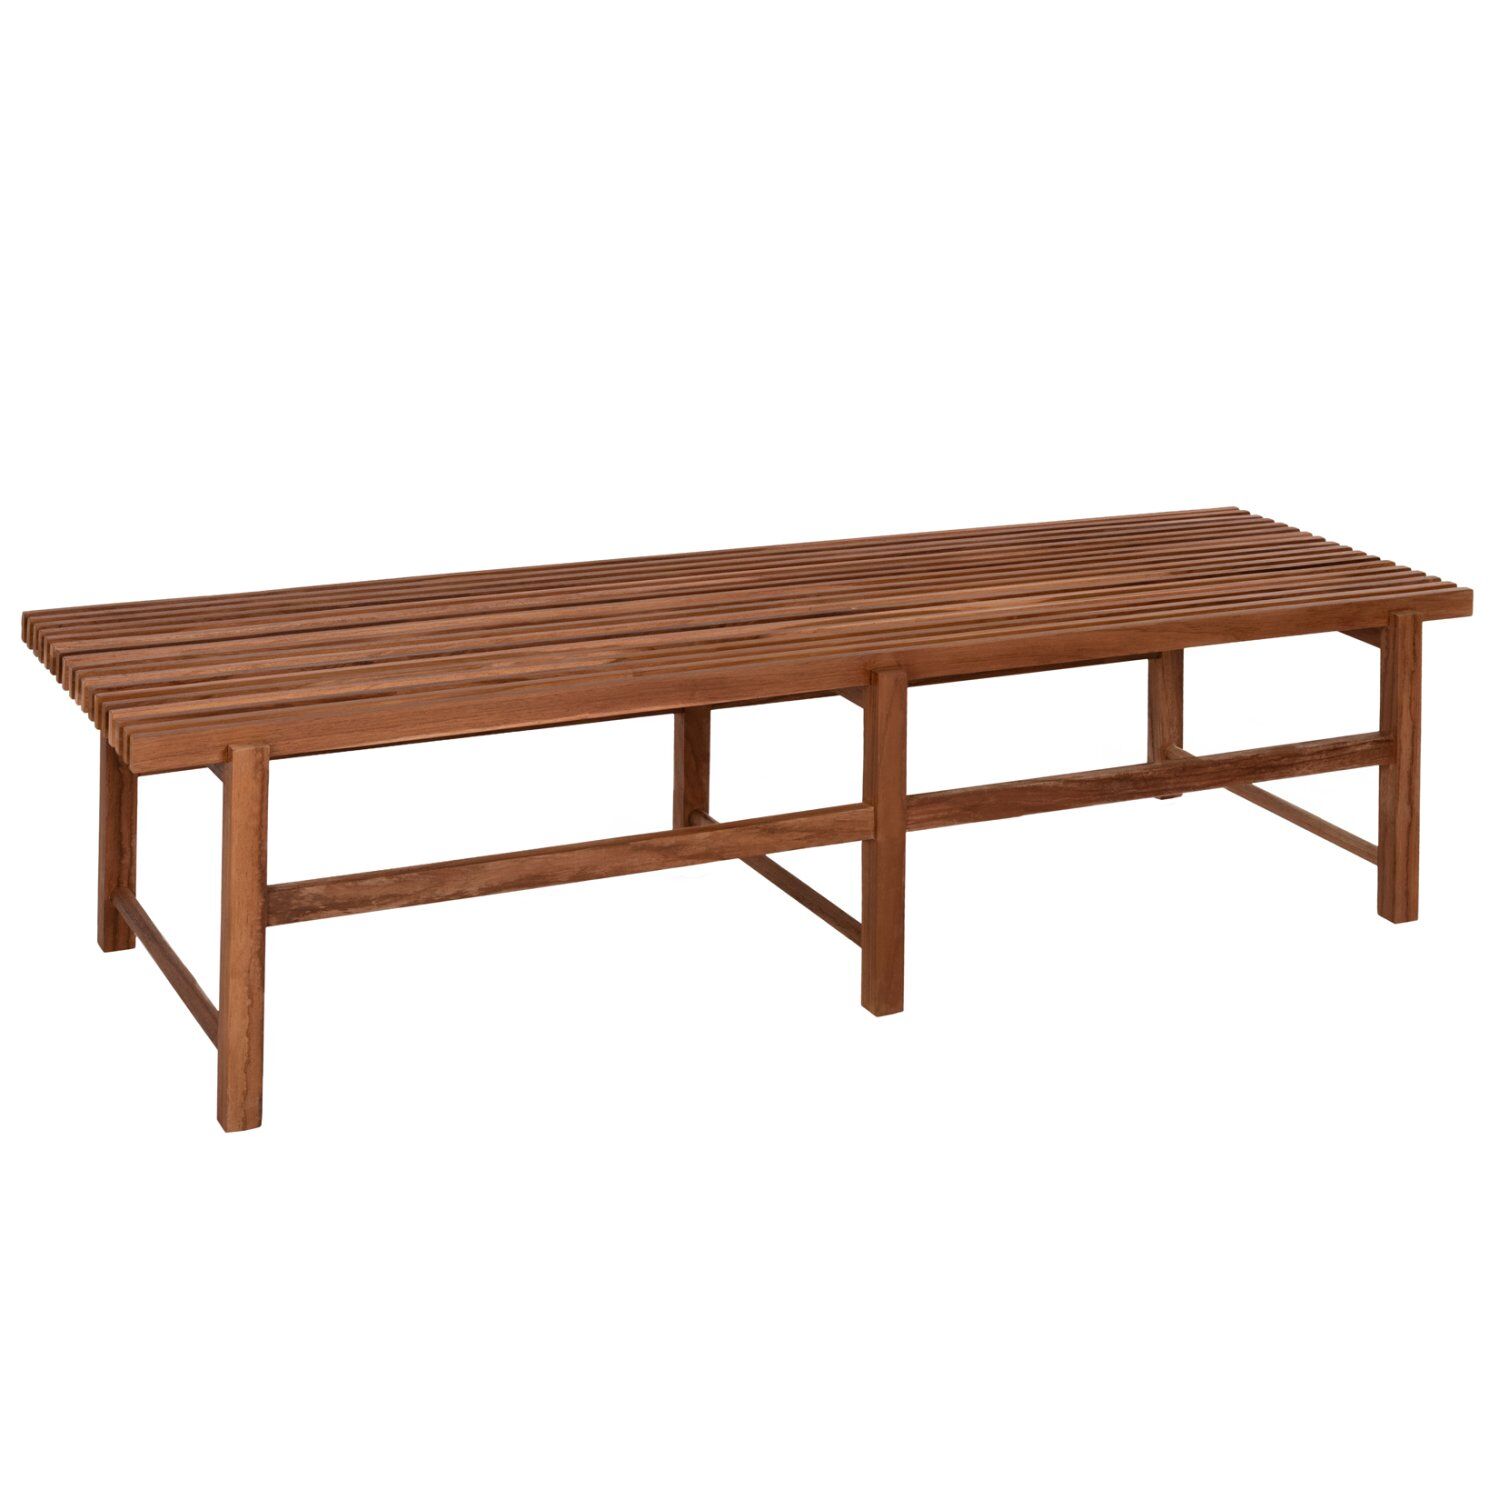 BENCH 3-SEATER HM9537 TEAK WOOD IN NATURAL COLOR 180x56x46Hcm.